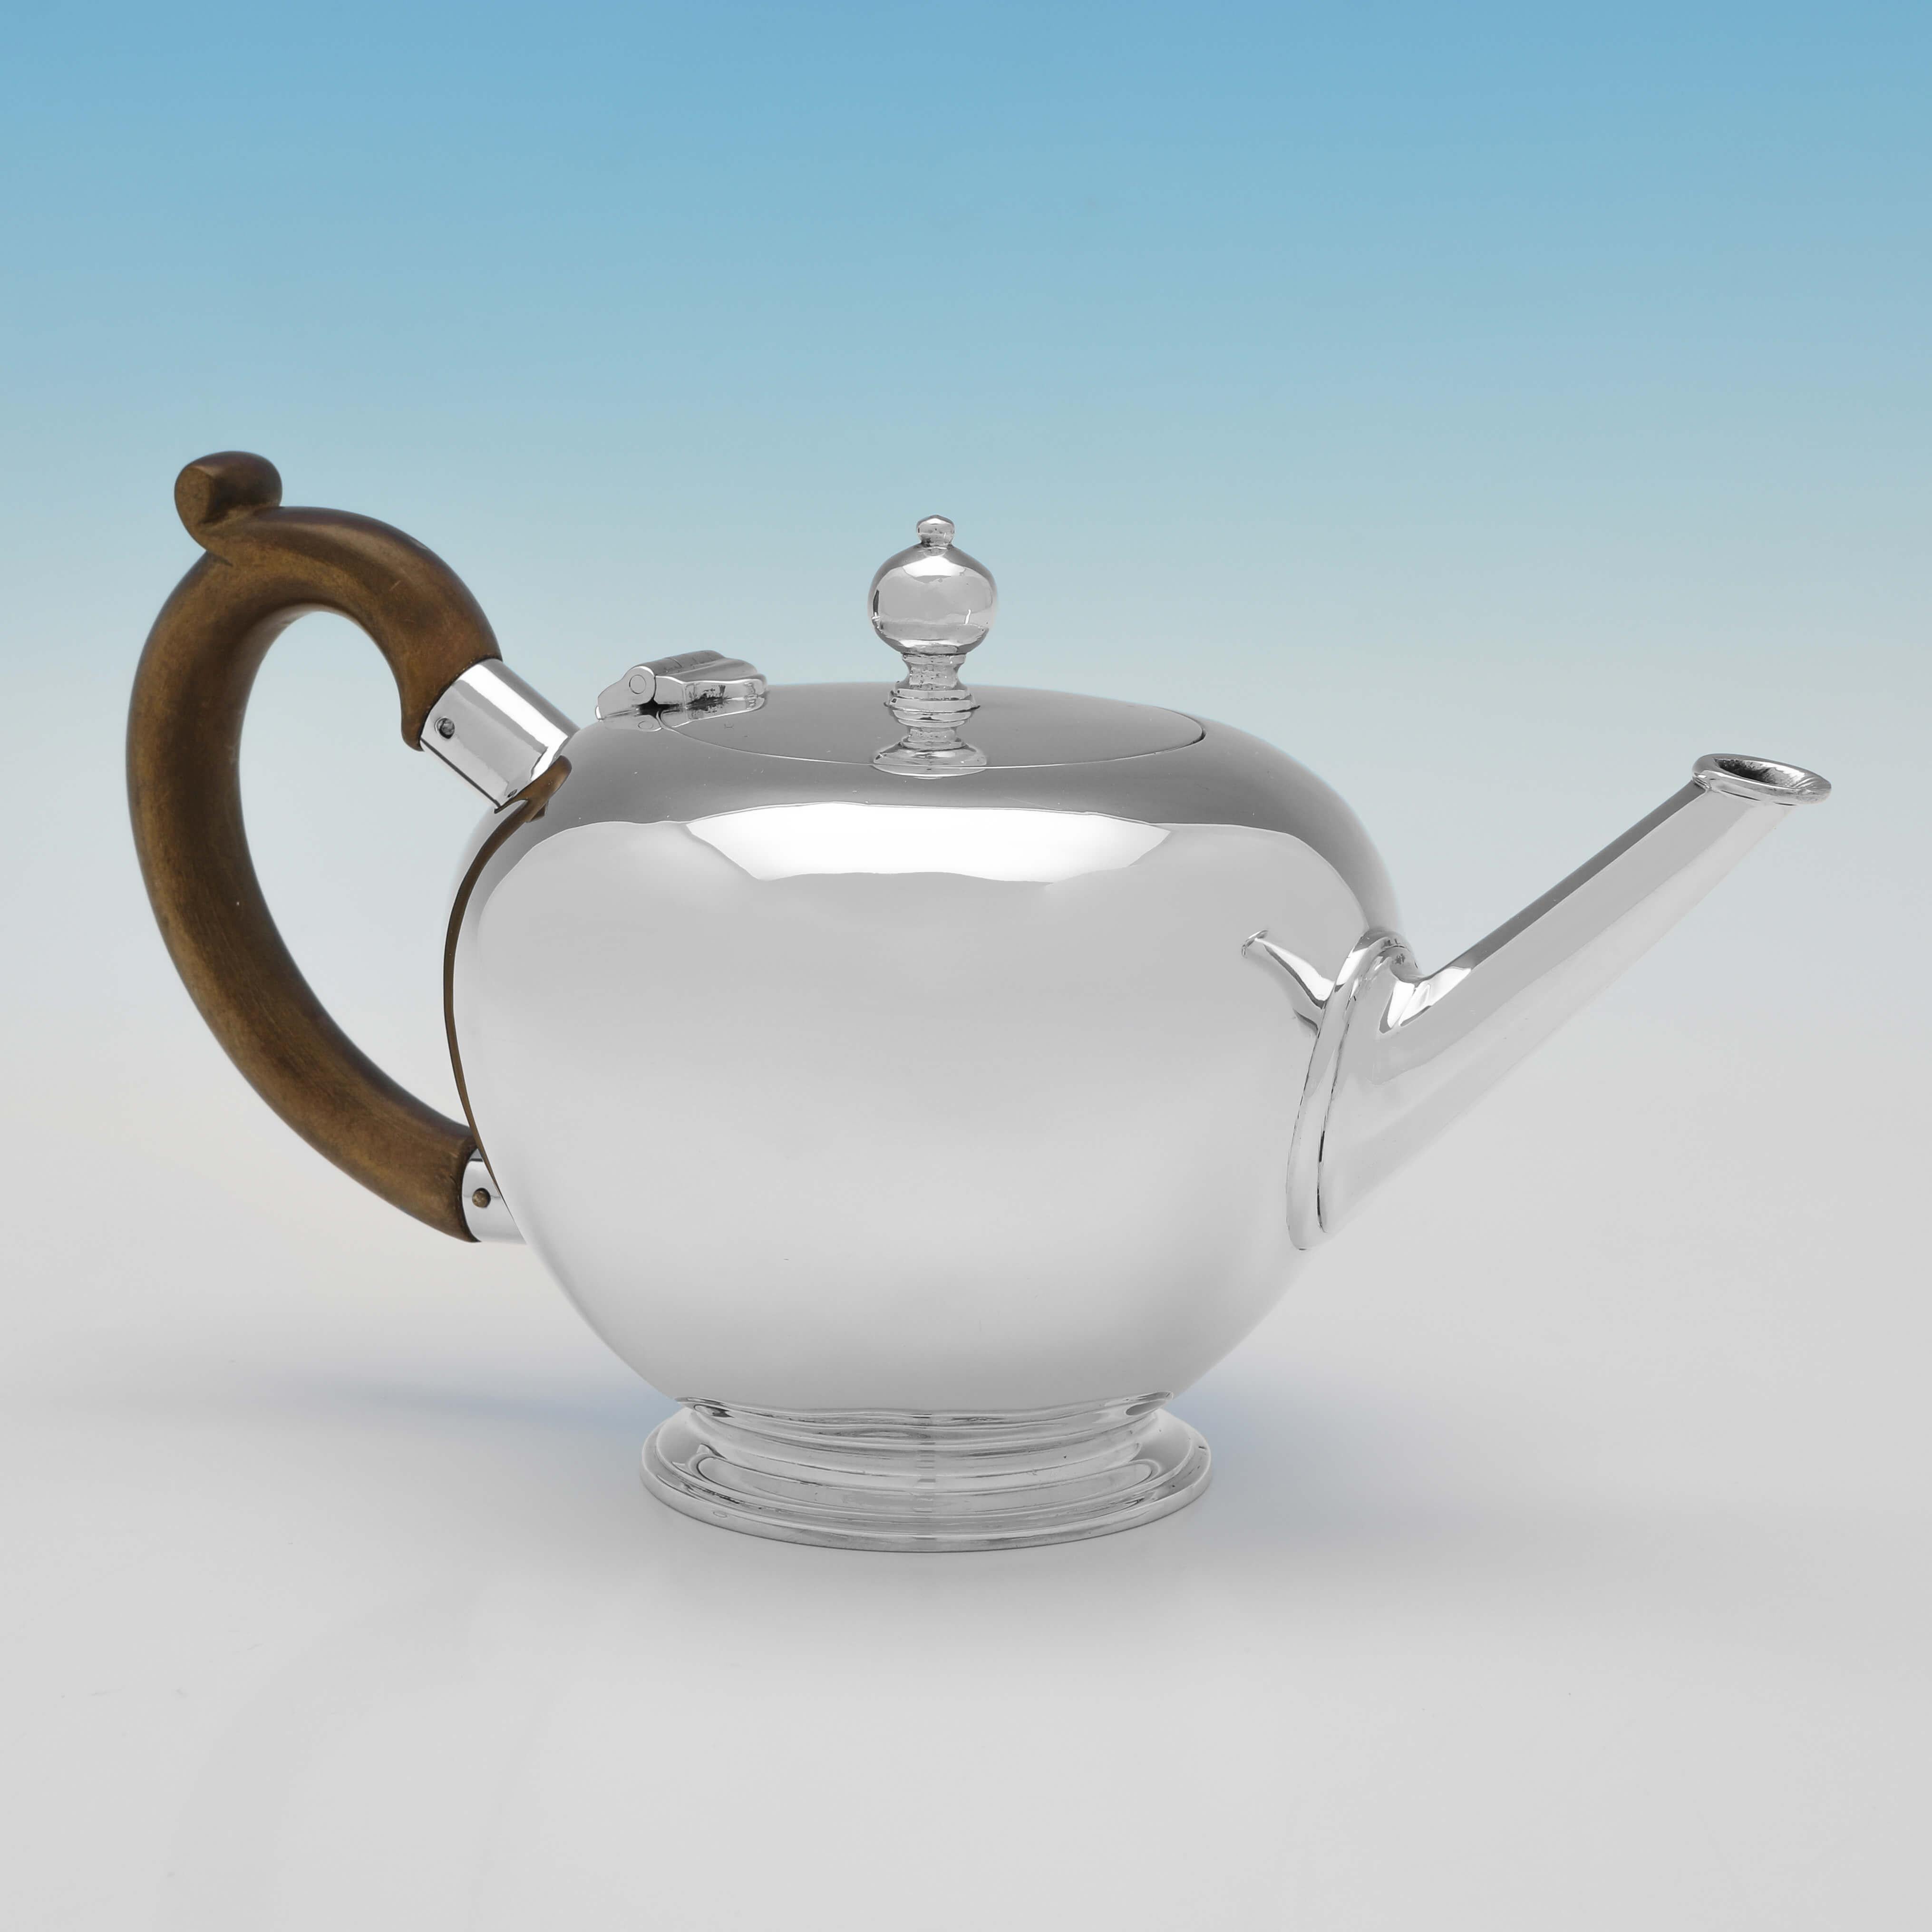 Hallmarked in London in 1937, this handsome, 3 Piece Sterling Silver Tea Set, comprises a teapot, a cream jug and a sugar bowl, all plain in style. The Teapot measures 4.5